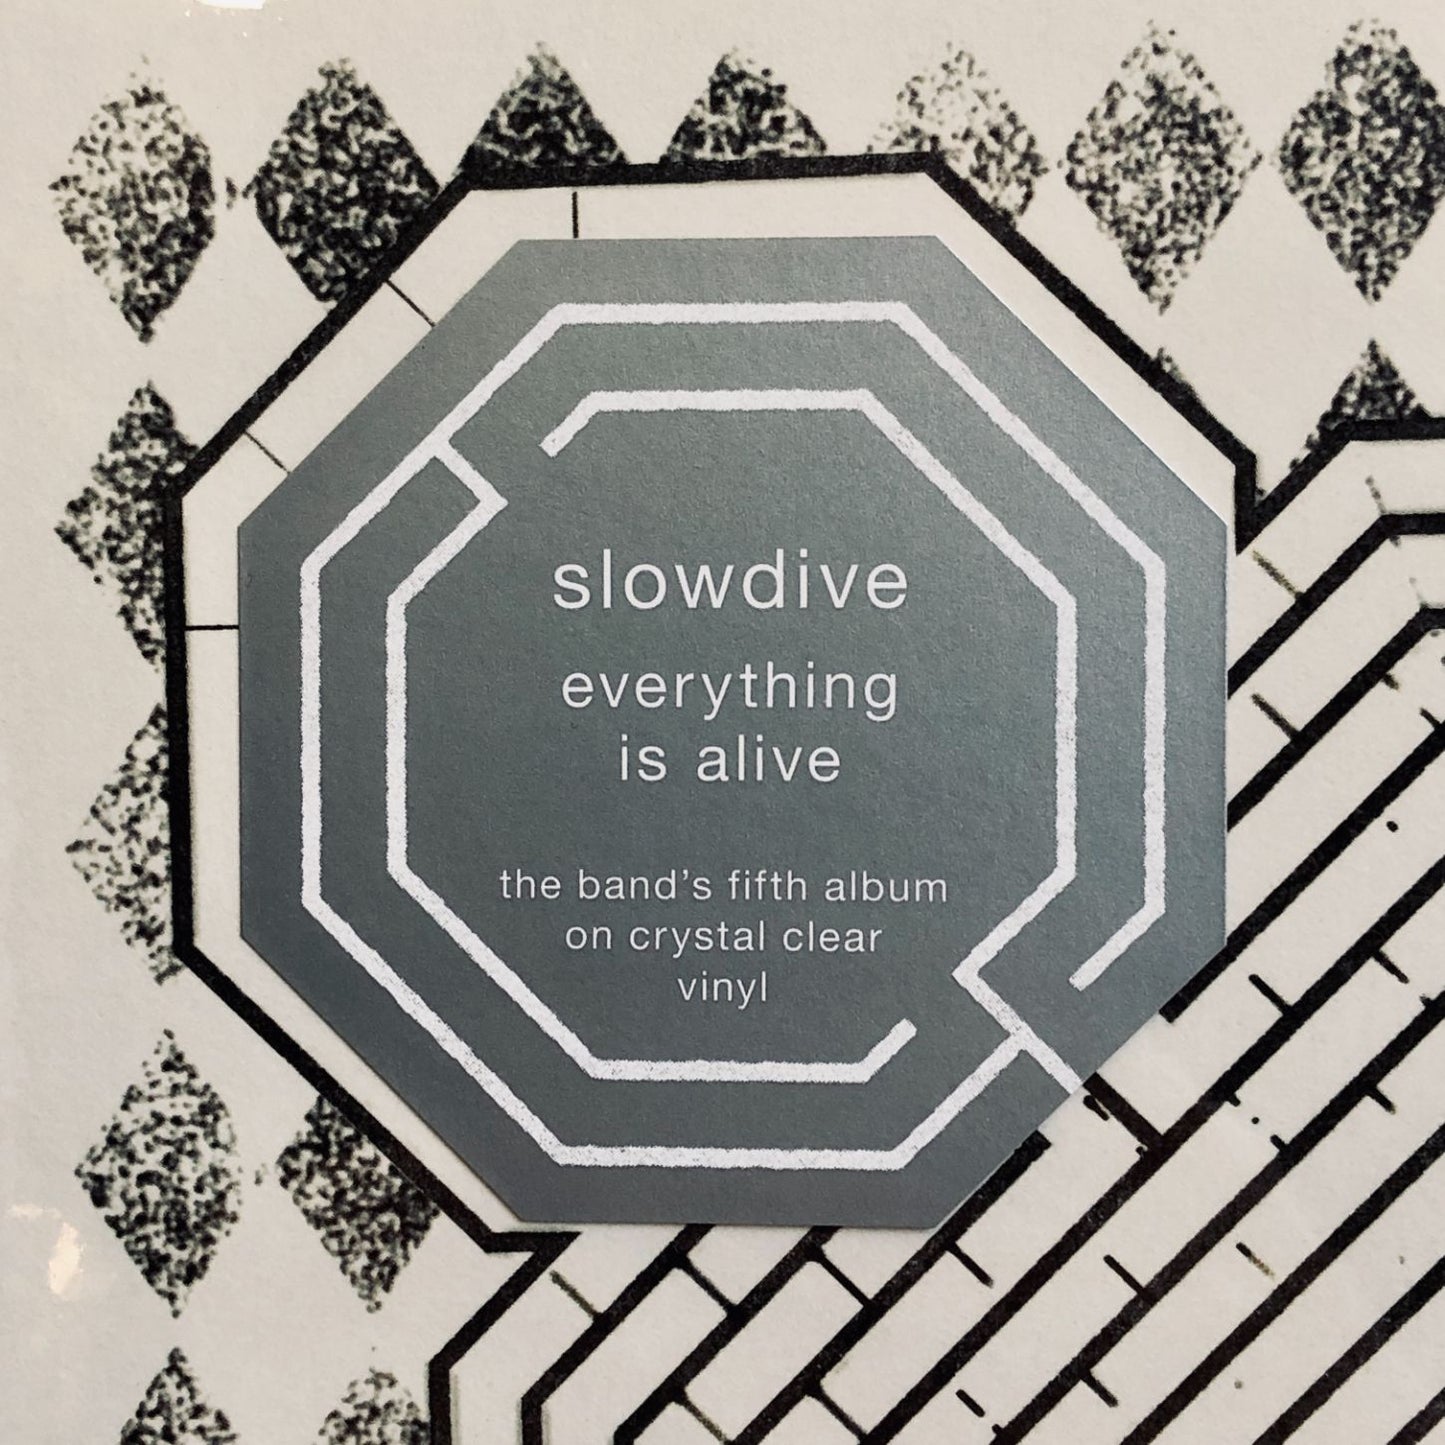 Slowdive - everything is alive. LP [Crystal Clear Vinyl Edition]